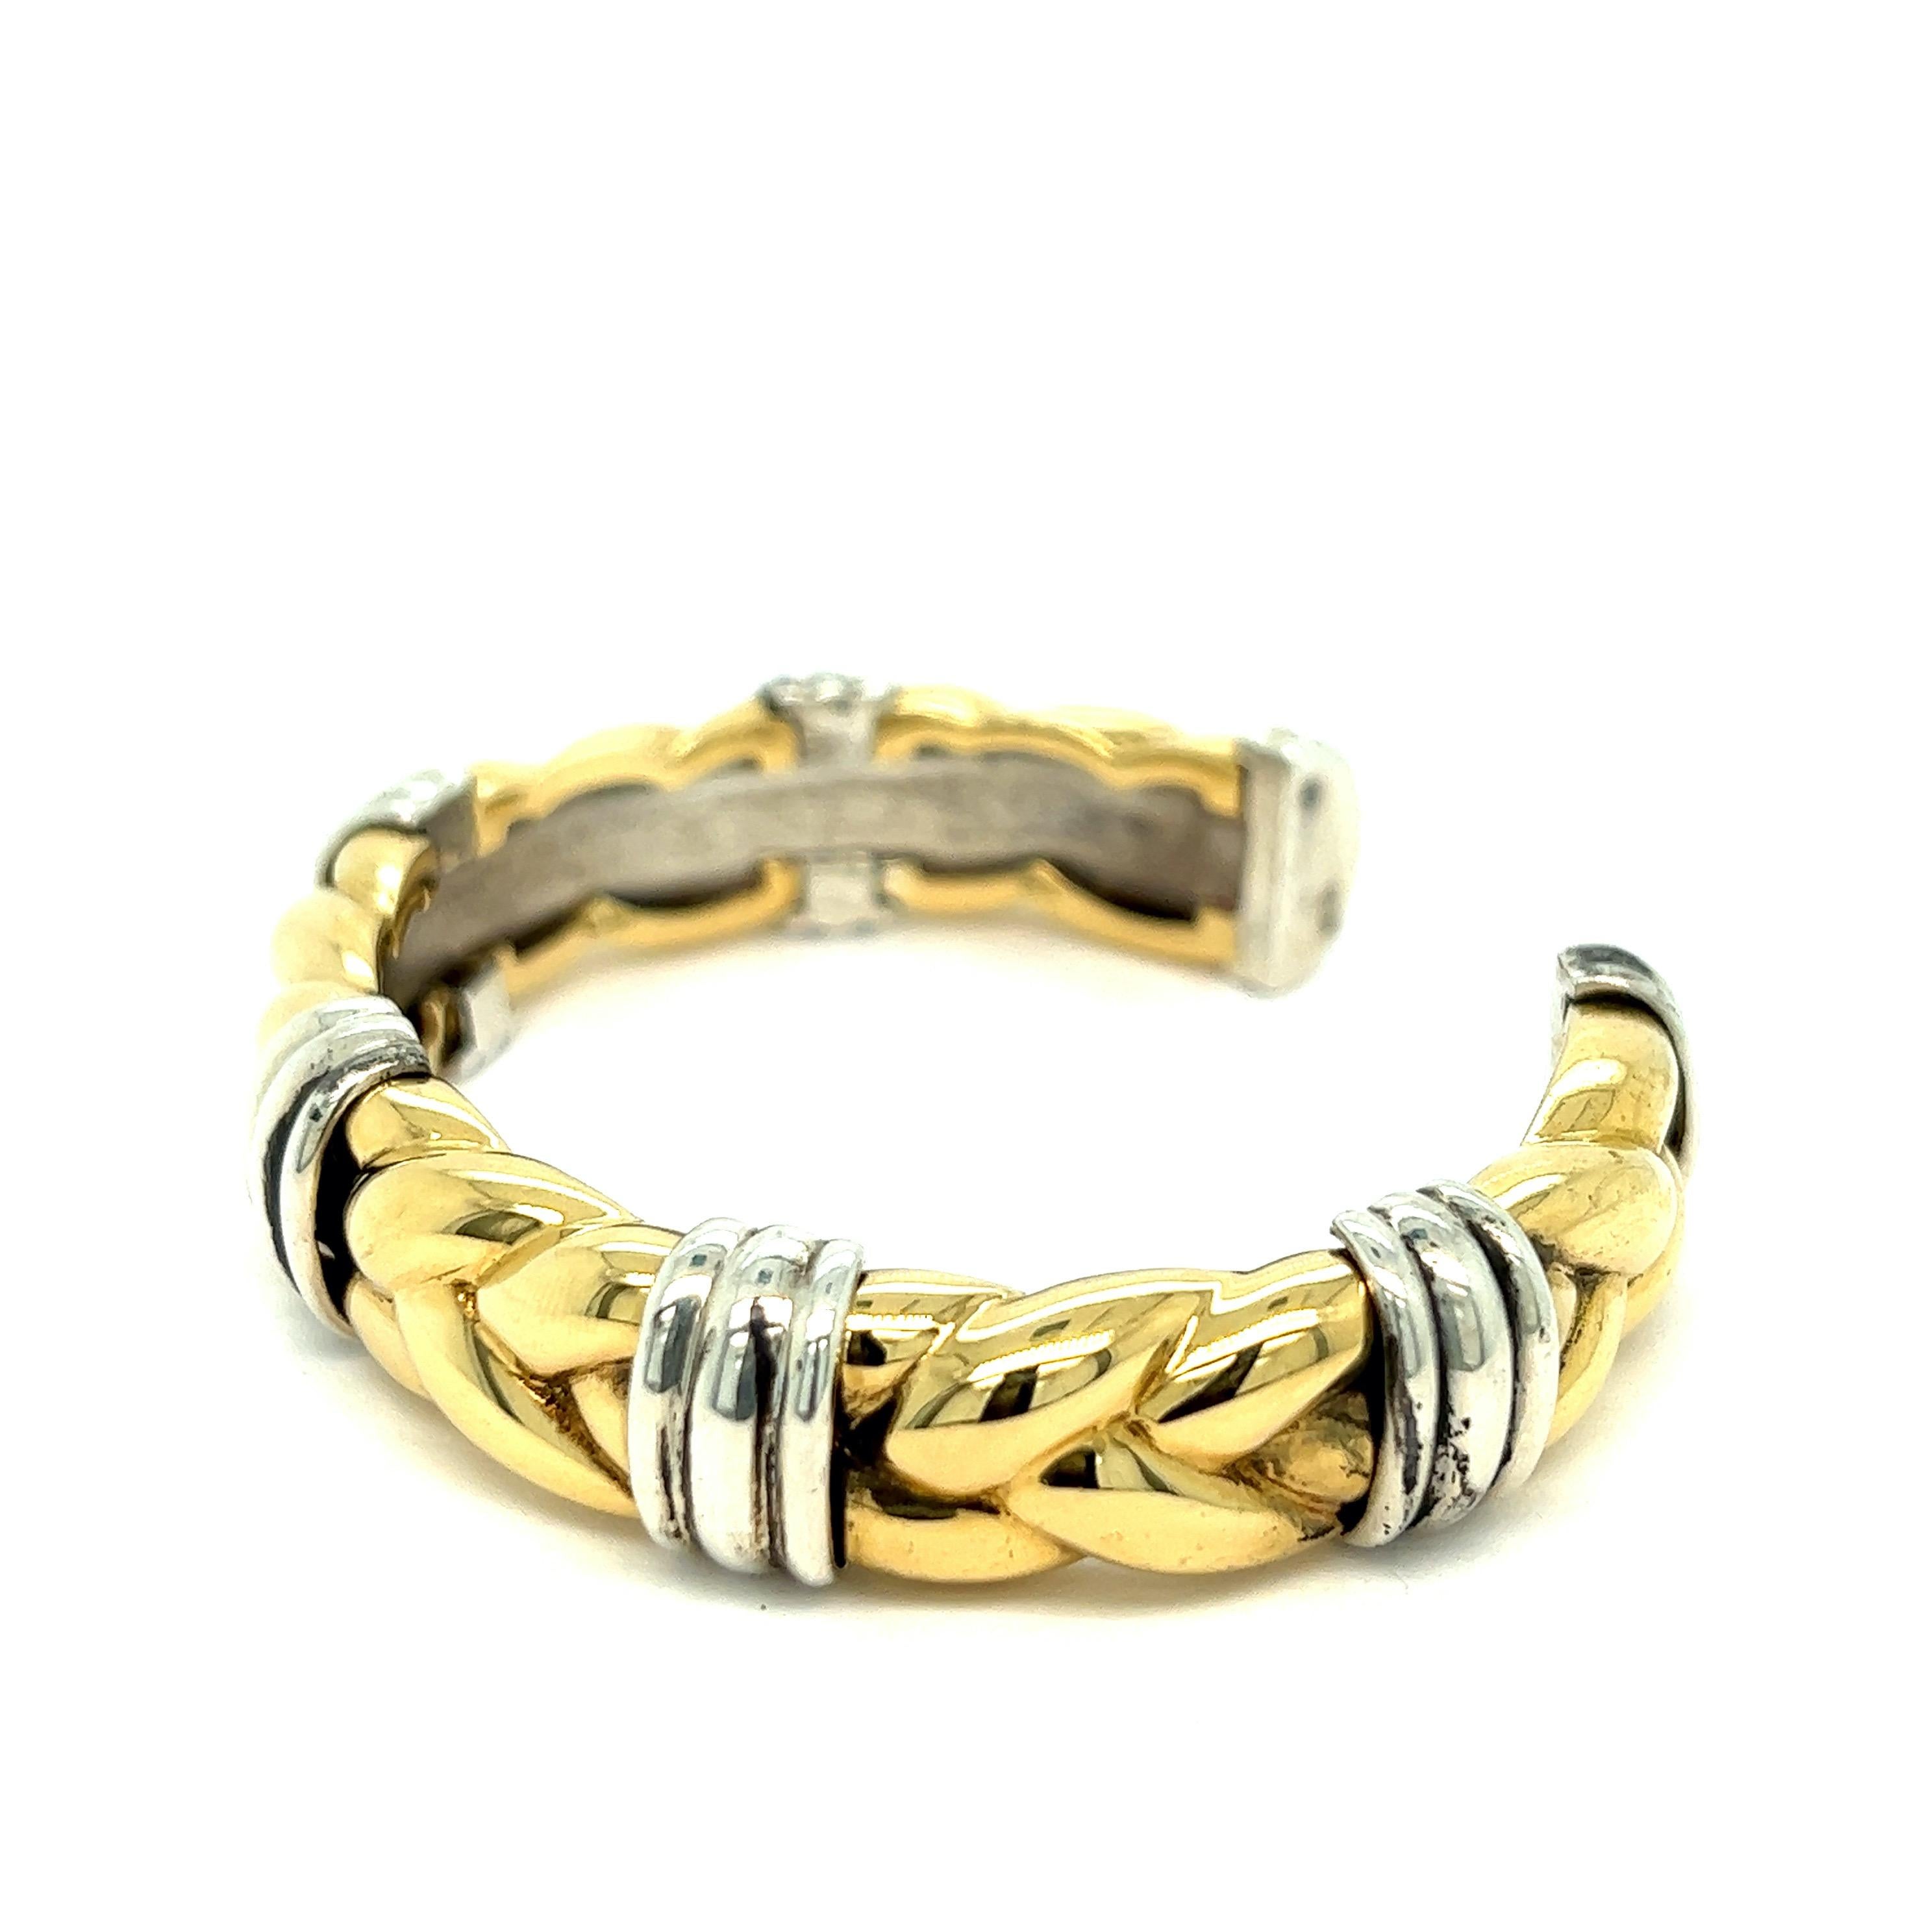 Bvlgari braided gold cuff bracelet

Braided design, 18 karat yellow gold and sterling silver; marked Bvlgari, 750, 925

Size: width 0.5 inch, inner circumference 6.25 inches, diameter 2 inches
Total weight: 57.0 grams